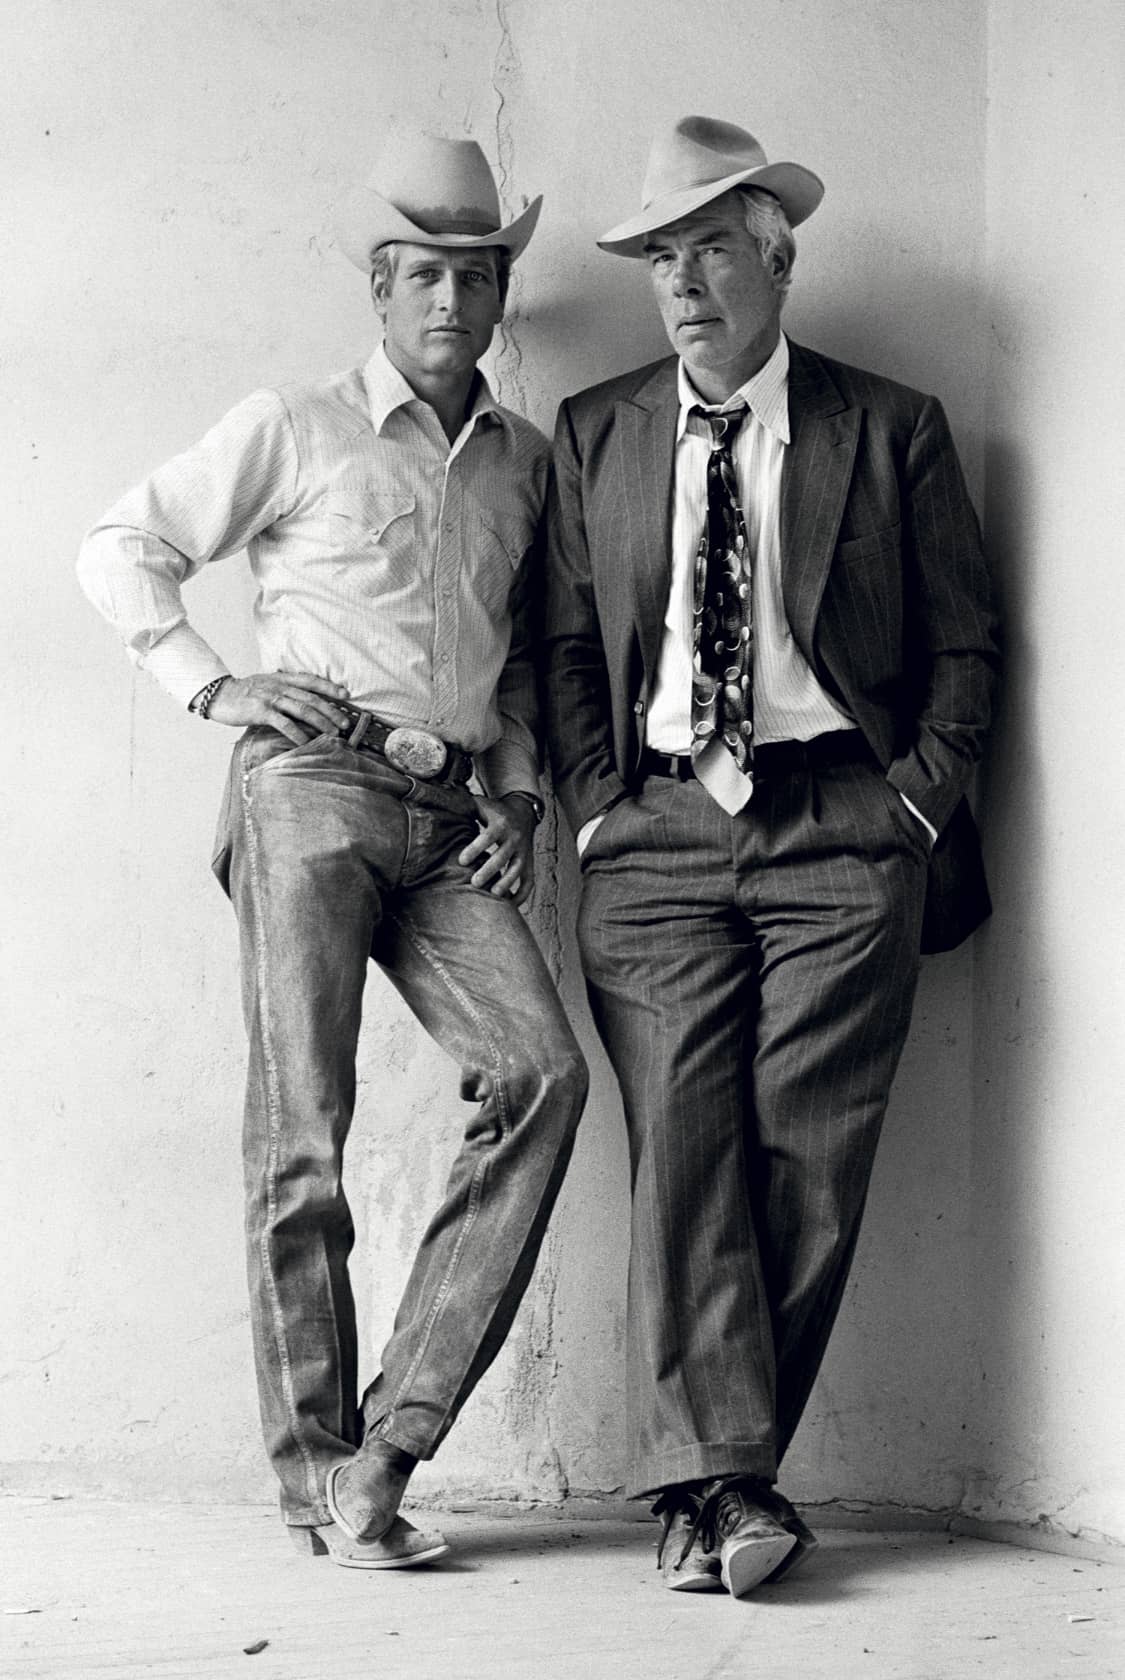 Terry O'Neill Paul Newman and Lee Marvin, Arizona Lifetime Gelatin Silver Print *available in other mediums & editions